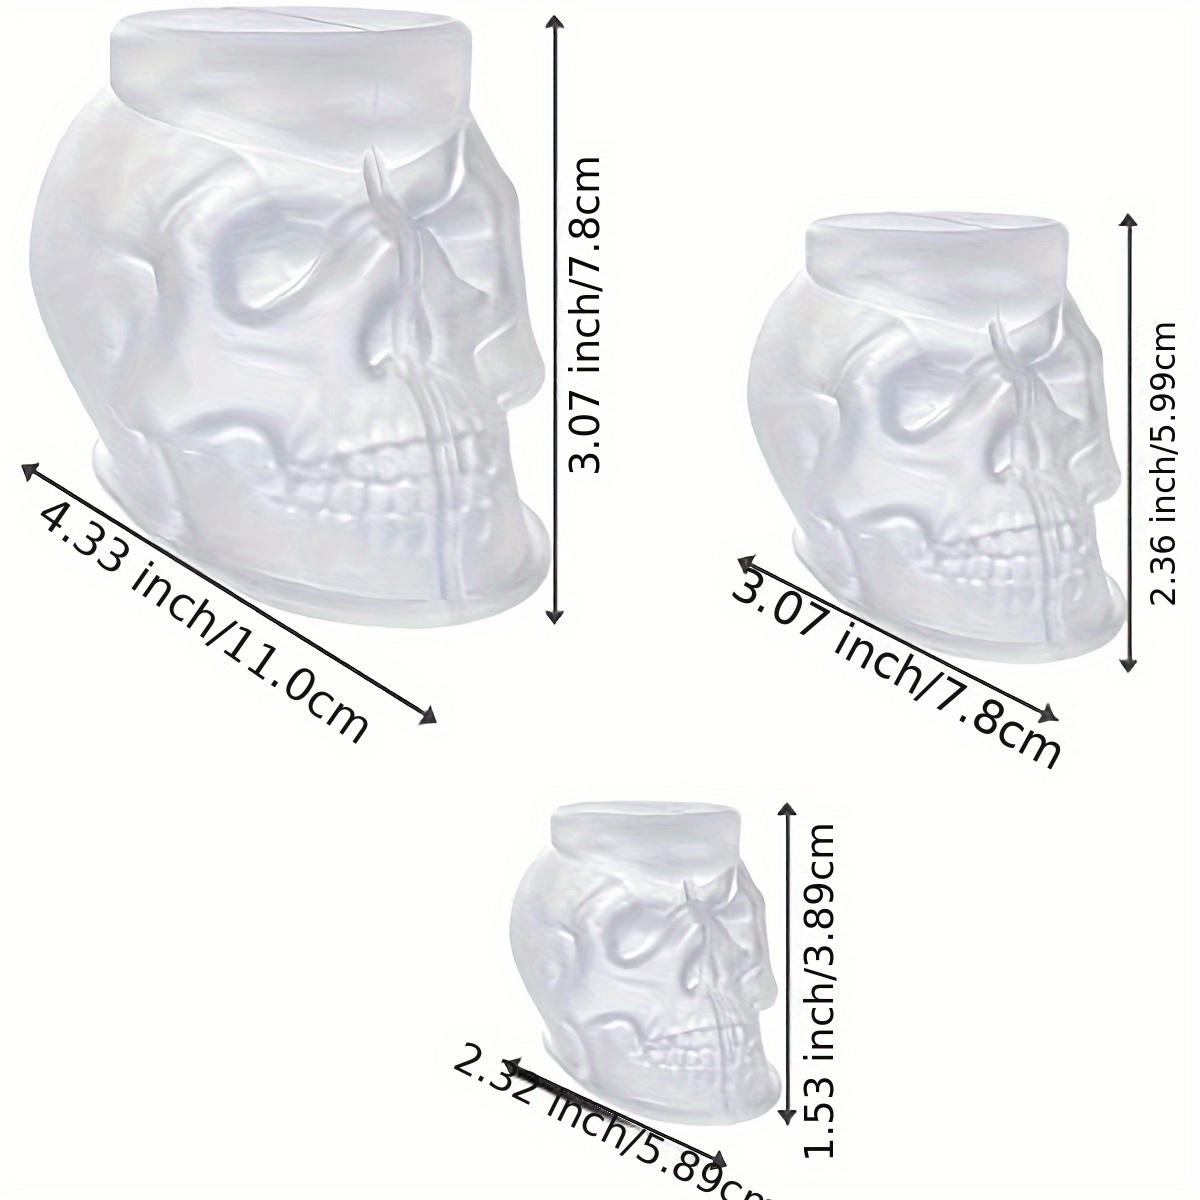 Buy Skull Resin Ring Mold, Silicone, Size 7 at Ubuy France